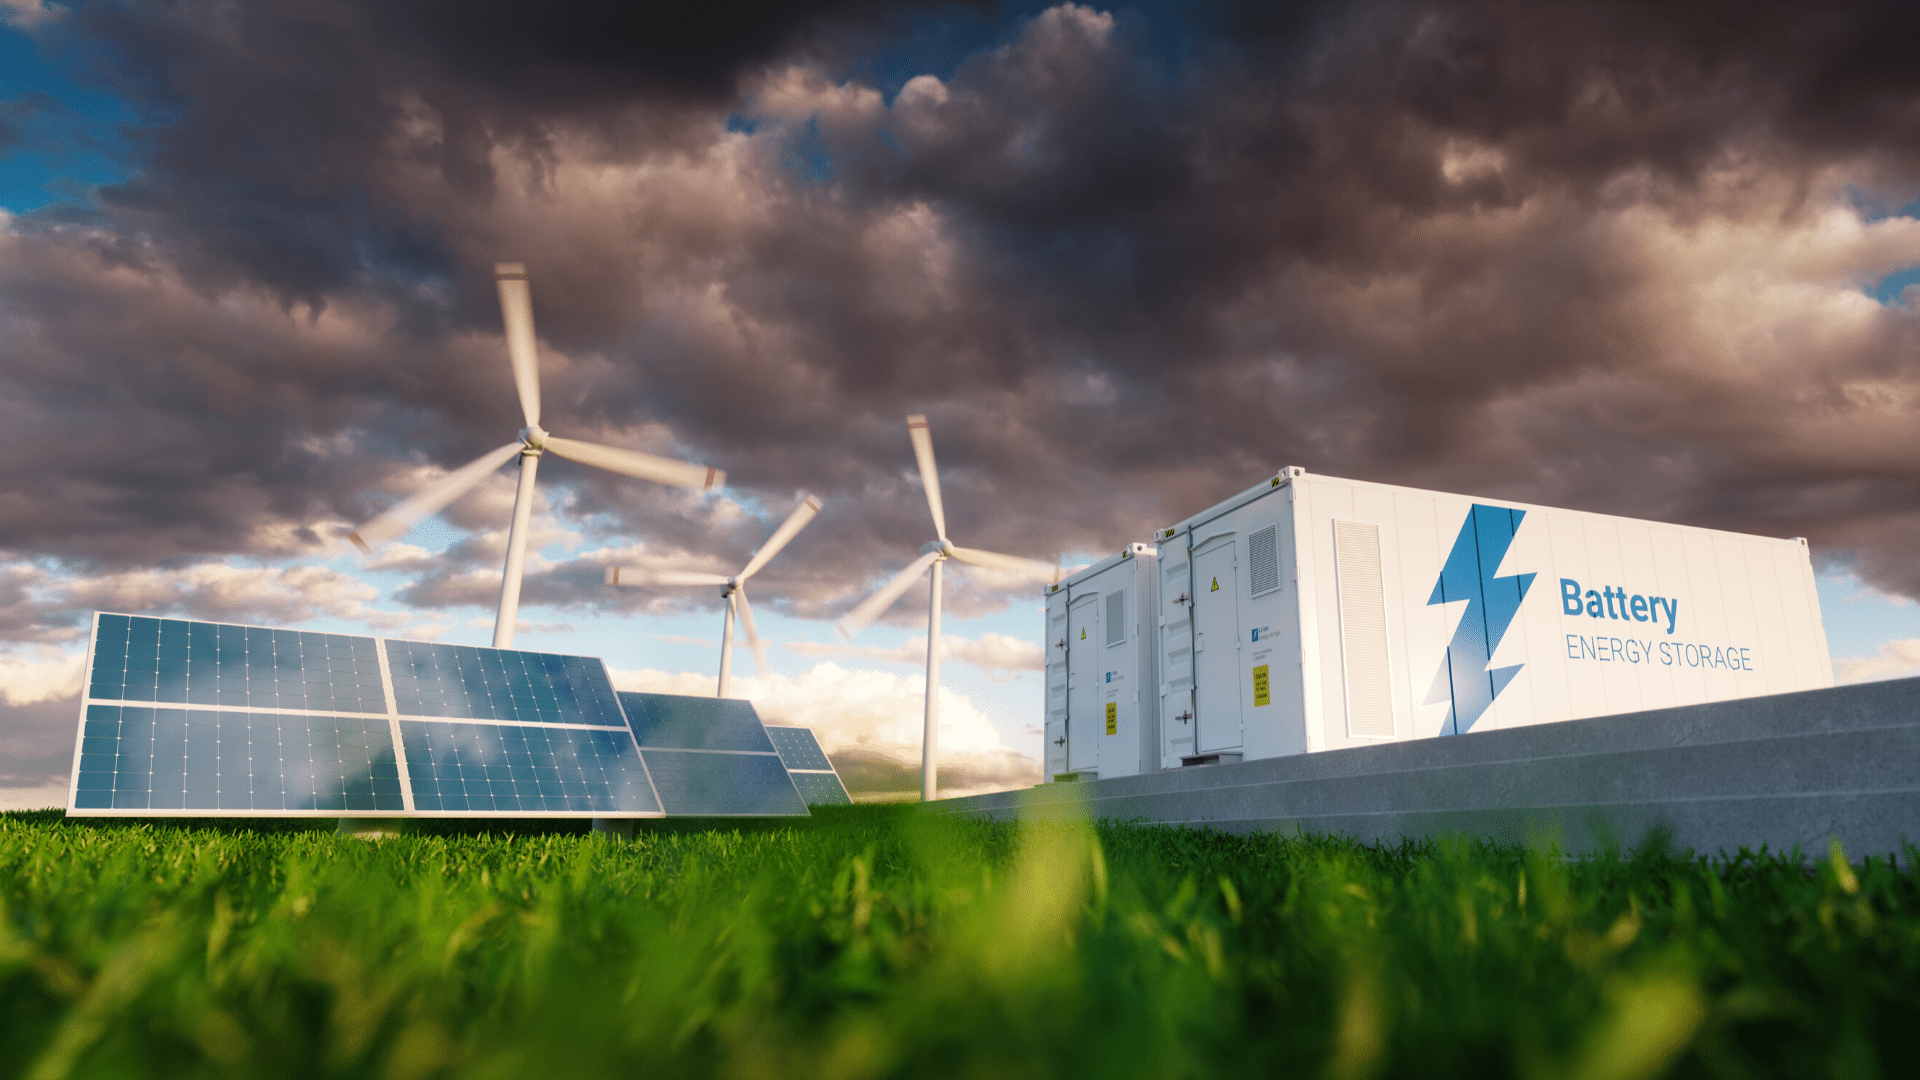 energy storage facility including solar panels and wind turbines